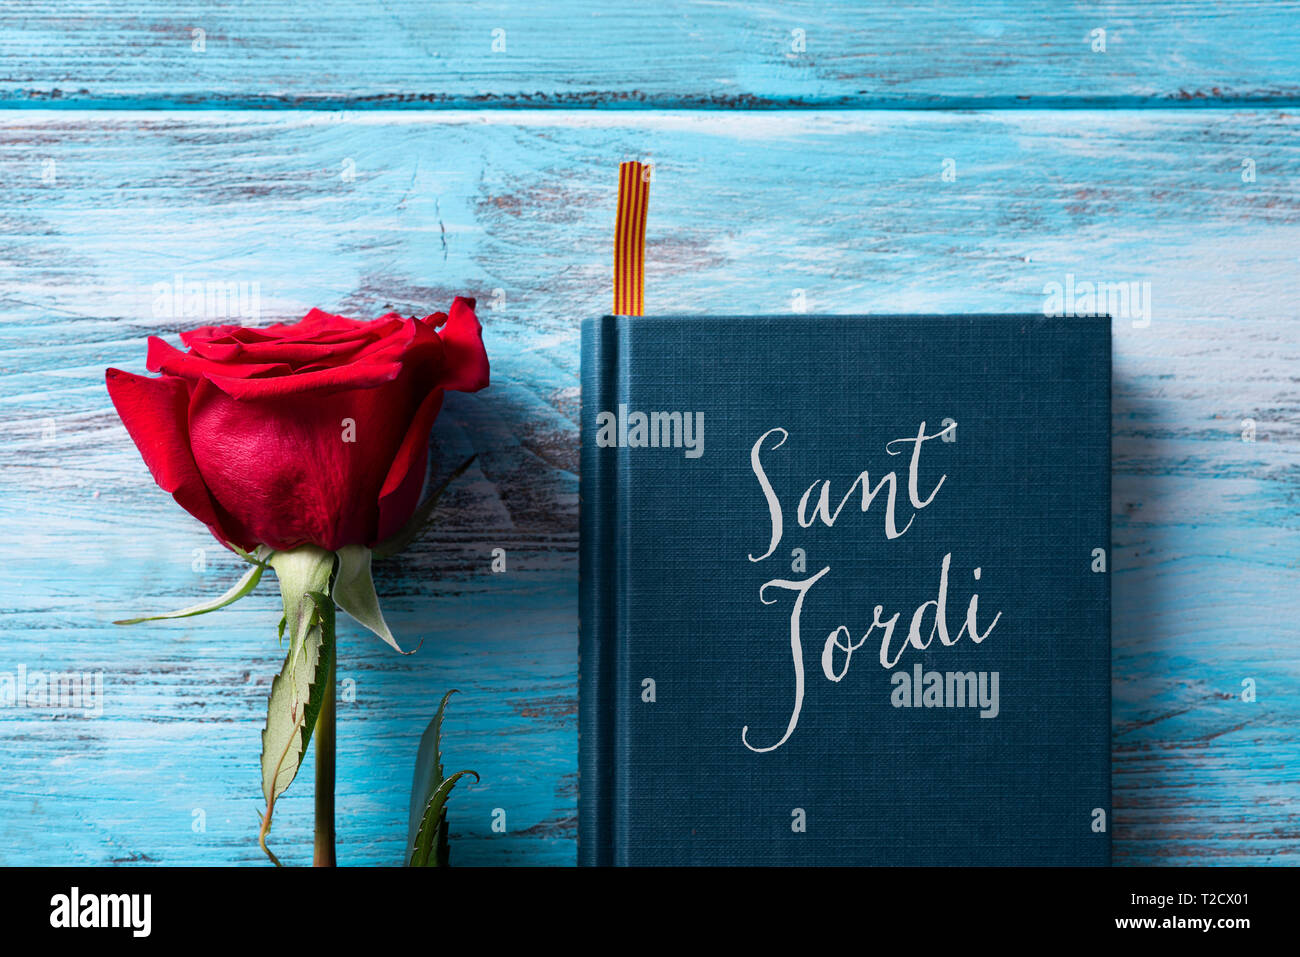 high angle view of a red rose and a book with the text Sant Jordi, the Catalan name for Saint George Day, when it is tradition to give red roses and b Stock Photo